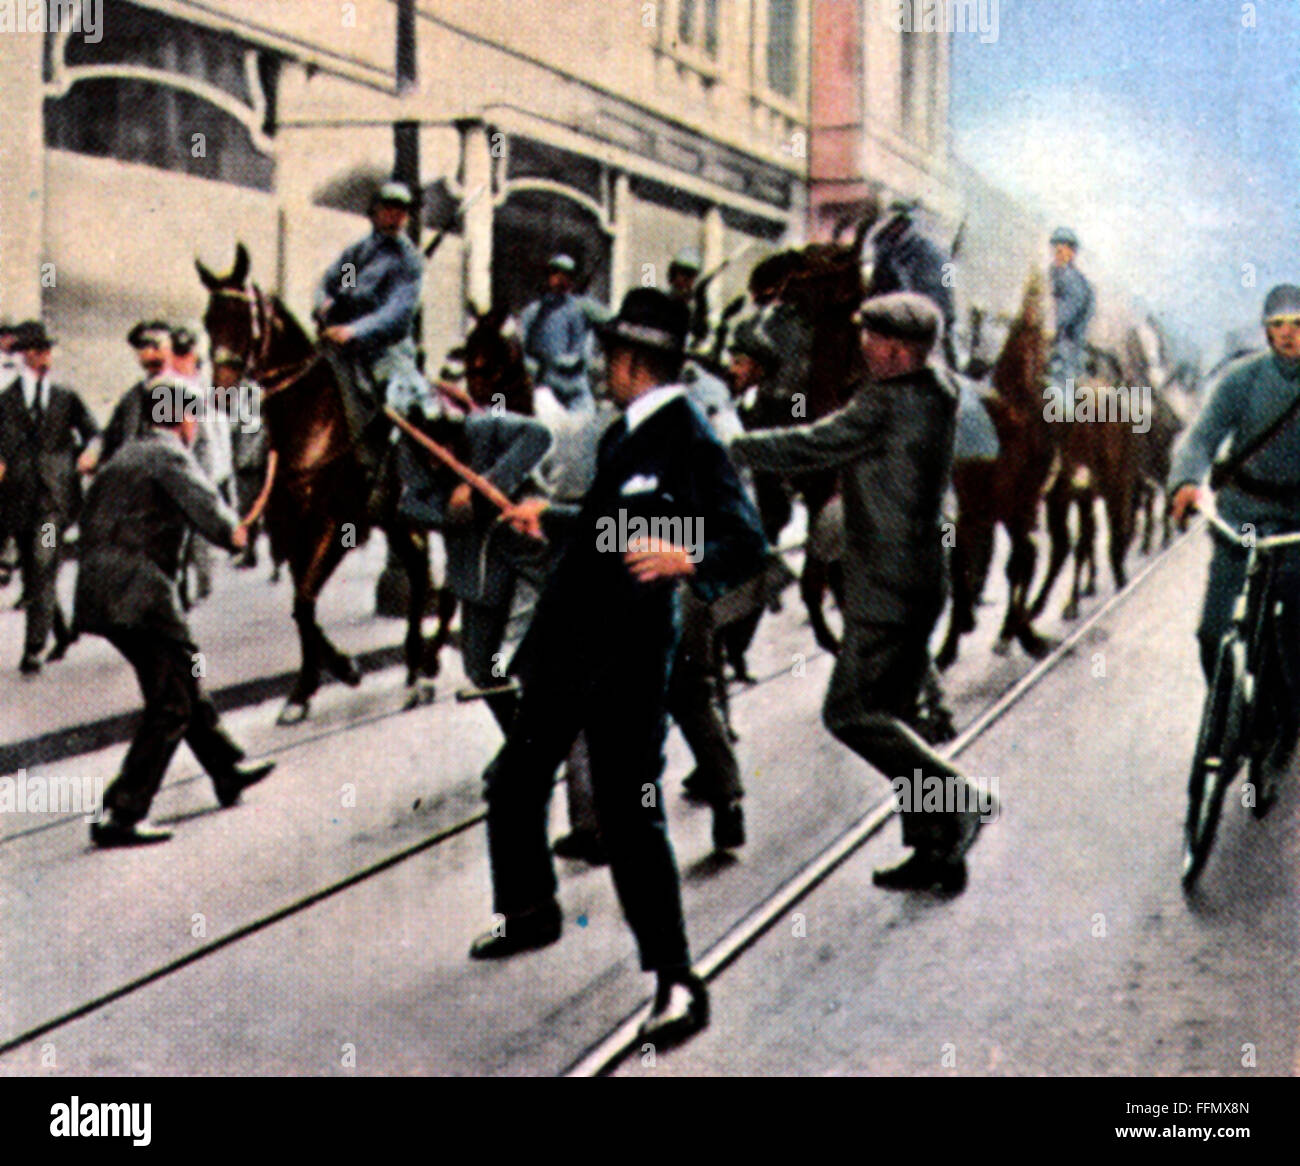 Rhenish separatism 1919 - 1924, Rhenish separatists are attacking a German policemen, December 1923, coloured photograph, cigarette card, series 'Die Nachkriegszeit', 1935, Additional-Rights-Clearences-Not Available Stock Photo